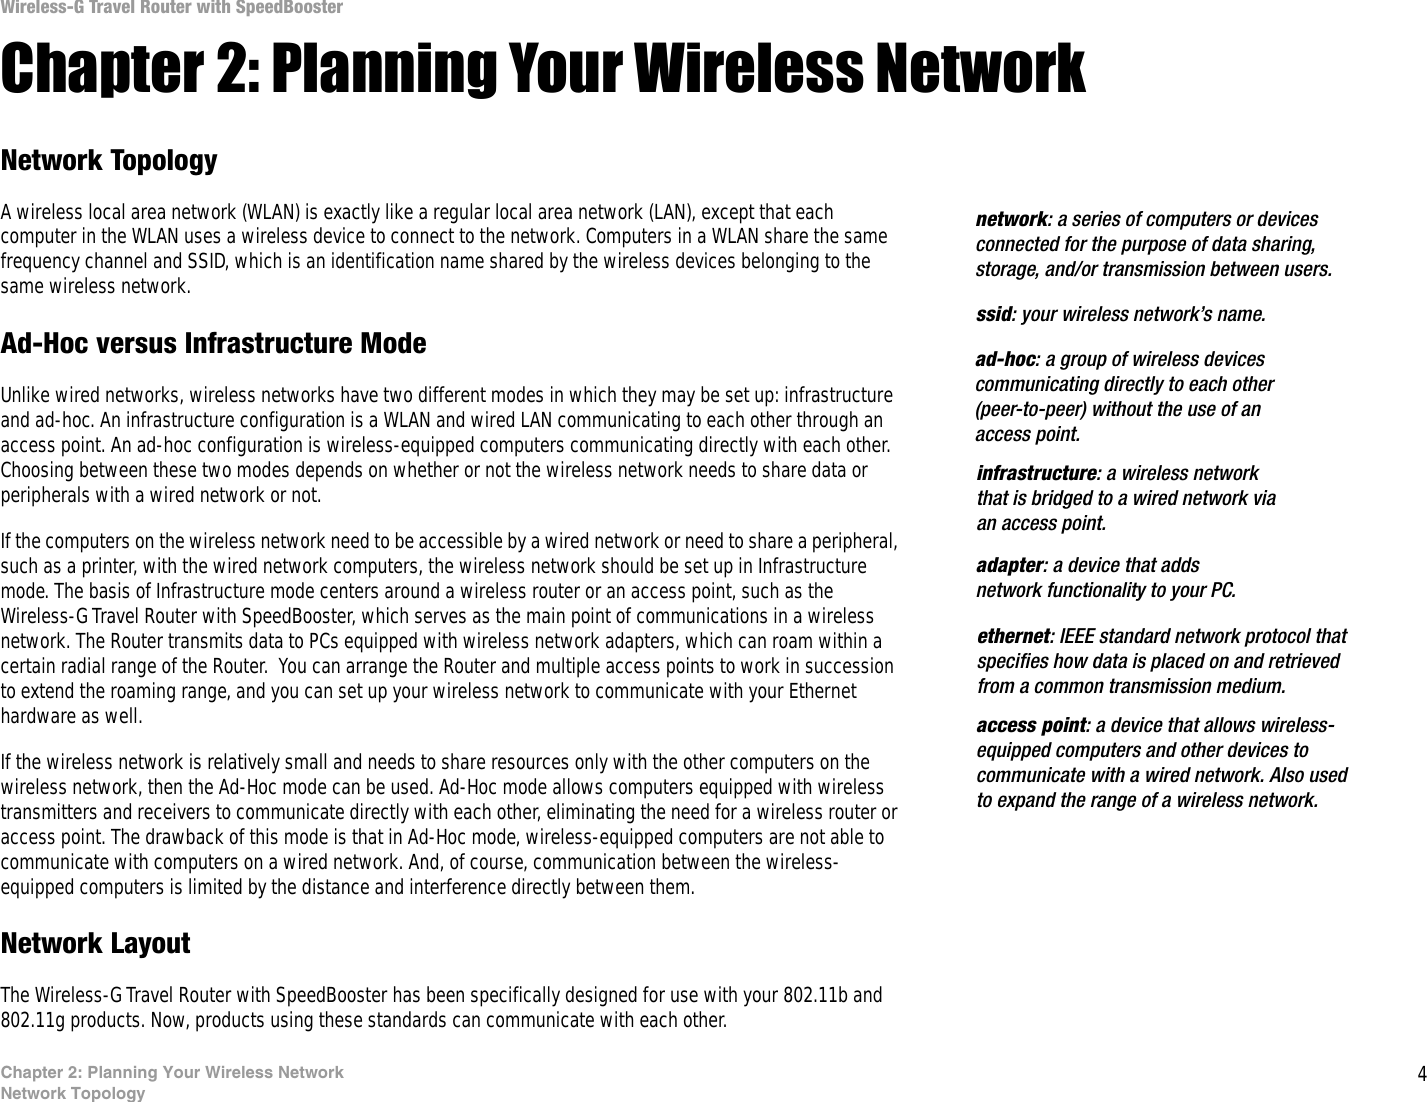 4Chapter 2: Planning Your Wireless NetworkNetwork TopologyWireless-G Travel Router with SpeedBoosterChapter 2: Planning Your Wireless NetworkNetwork TopologyA wireless local area network (WLAN) is exactly like a regular local area network (LAN), except that each computer in the WLAN uses a wireless device to connect to the network. Computers in a WLAN share the same frequency channel and SSID, which is an identification name shared by the wireless devices belonging to the same wireless network.Ad-Hoc versus Infrastructure ModeUnlike wired networks, wireless networks have two different modes in which they may be set up: infrastructure and ad-hoc. An infrastructure configuration is a WLAN and wired LAN communicating to each other through an access point. An ad-hoc configuration is wireless-equipped computers communicating directly with each other. Choosing between these two modes depends on whether or not the wireless network needs to share data or peripherals with a wired network or not. If the computers on the wireless network need to be accessible by a wired network or need to share a peripheral, such as a printer, with the wired network computers, the wireless network should be set up in Infrastructure mode. The basis of Infrastructure mode centers around a wireless router or an access point, such as the Wireless-G Travel Router with SpeedBooster, which serves as the main point of communications in a wireless network. The Router transmits data to PCs equipped with wireless network adapters, which can roam within a certain radial range of the Router.  You can arrange the Router and multiple access points to work in succession to extend the roaming range, and you can set up your wireless network to communicate with your Ethernet hardware as well. If the wireless network is relatively small and needs to share resources only with the other computers on the wireless network, then the Ad-Hoc mode can be used. Ad-Hoc mode allows computers equipped with wireless transmitters and receivers to communicate directly with each other, eliminating the need for a wireless router or access point. The drawback of this mode is that in Ad-Hoc mode, wireless-equipped computers are not able to communicate with computers on a wired network. And, of course, communication between the wireless-equipped computers is limited by the distance and interference directly between them. Network LayoutThe Wireless-G Travel Router with SpeedBooster has been specifically designed for use with your 802.11b and 802.11g products. Now, products using these standards can communicate with each other.infrastructure: a wireless network that is bridged to a wired network via an access point.ssid: your wireless network’s name.ad-hoc: a group of wireless devices communicating directly to each other (peer-to-peer) without the use of an access point.access point: a device that allows wireless-equipped computers and other devices to communicate with a wired network. Also used to expand the range of a wireless network.adapter: a device that adds network functionality to your PC.ethernet: IEEE standard network protocol that specifies how data is placed on and retrieved from a common transmission medium.network: a series of computers or devices connected for the purpose of data sharing, storage, and/or transmission between users.